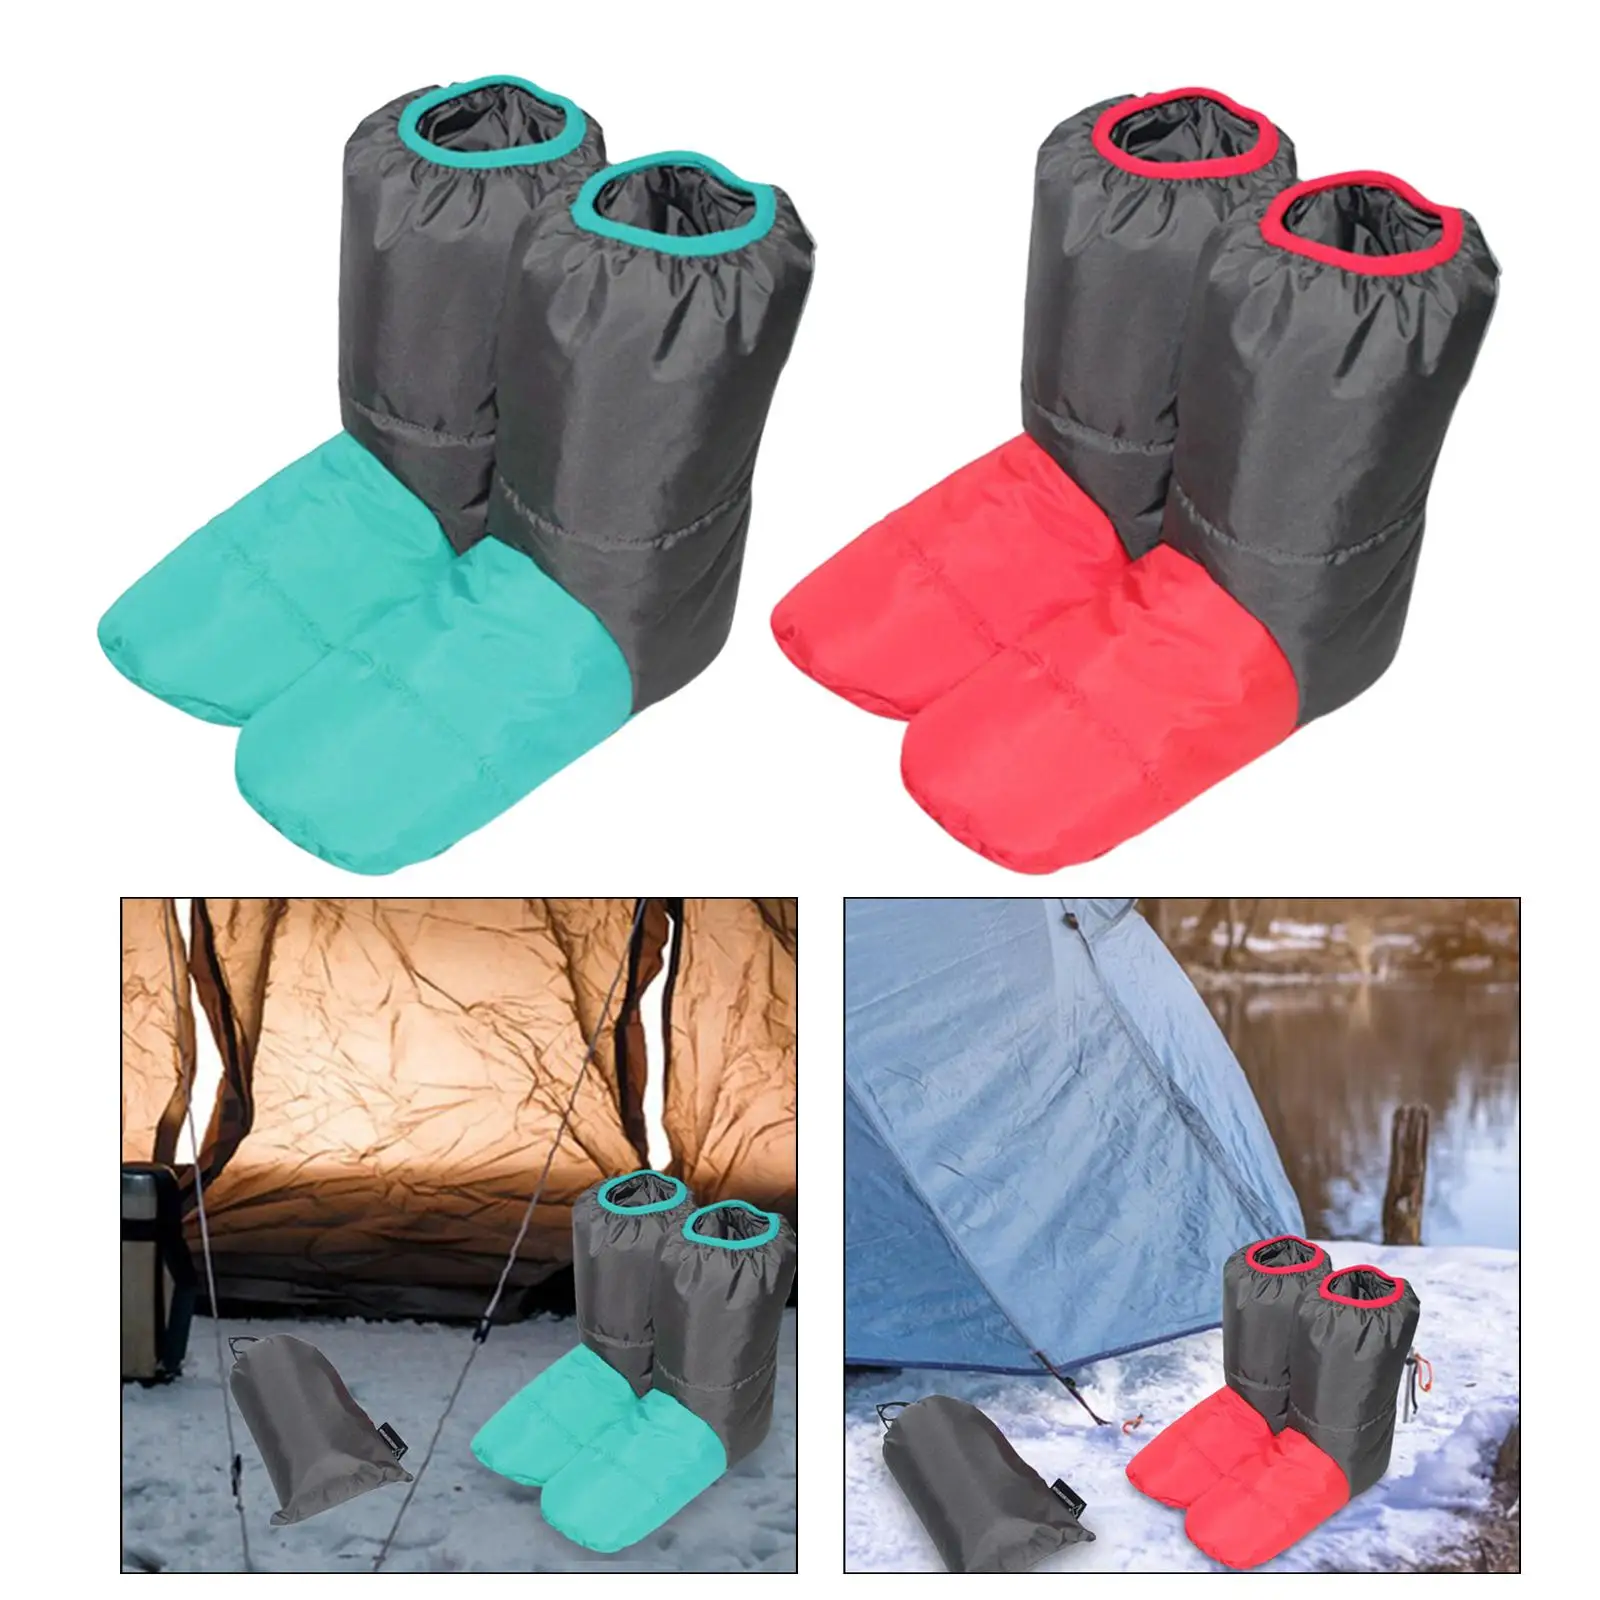 Down Booties Portable with Storage Bag Cozy Sleeping Sock Breathable Soft Warm Socks for Camping Backpacking Sleeping Bag